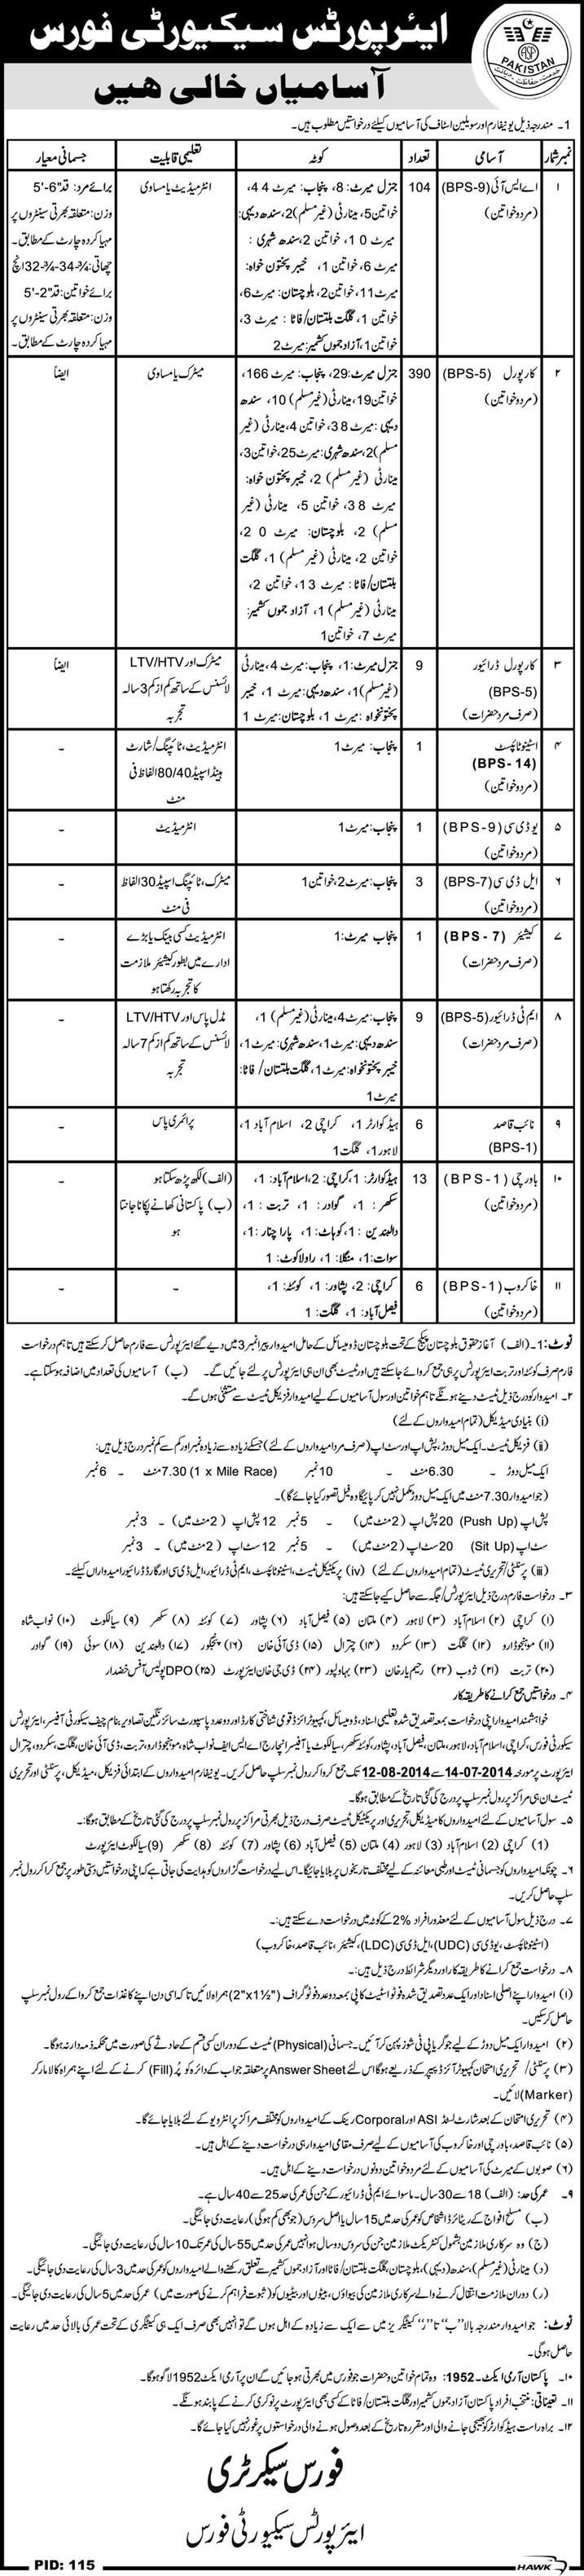 Airport Security Force Jobs 2014 July Pakistan ASI, Corporal, Drivers & Others Join